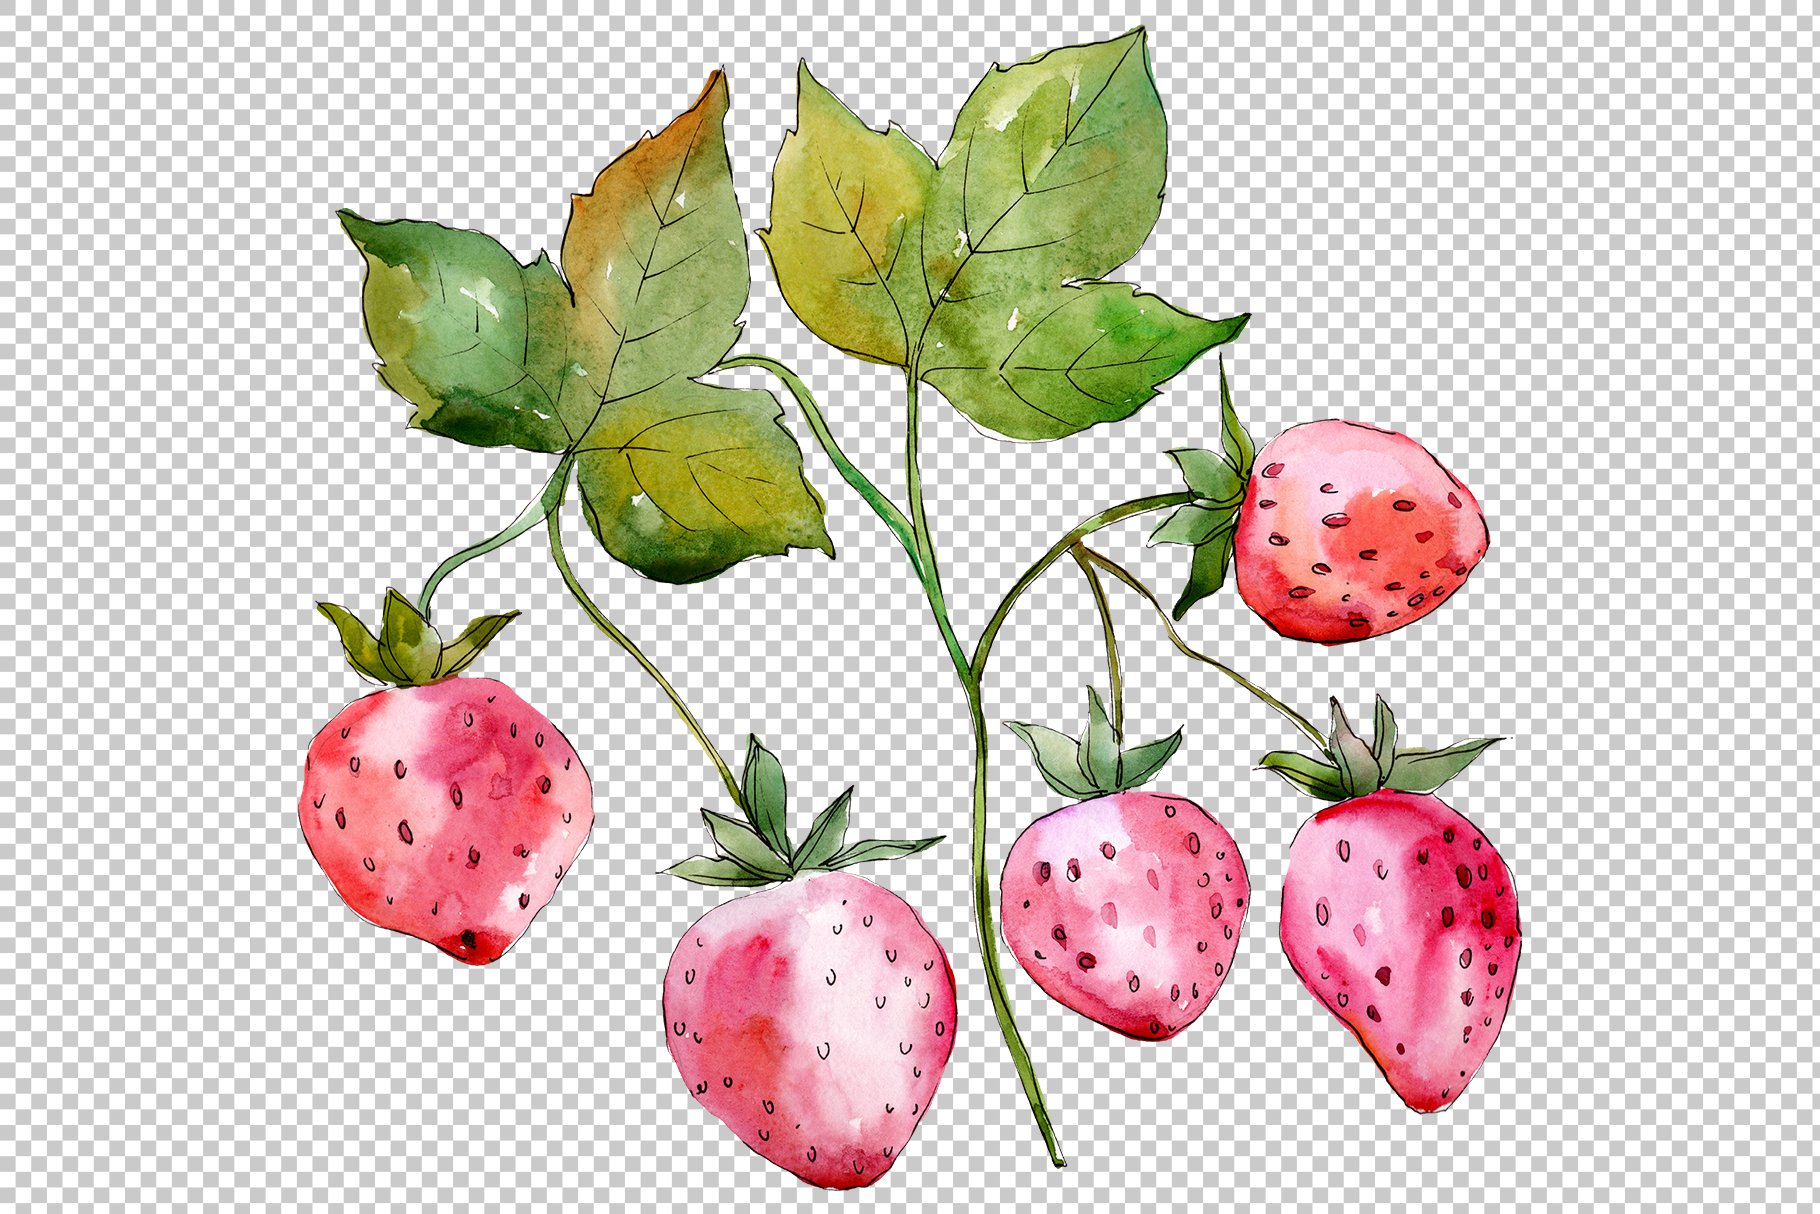 Watercolor strawberries on a transparent background.